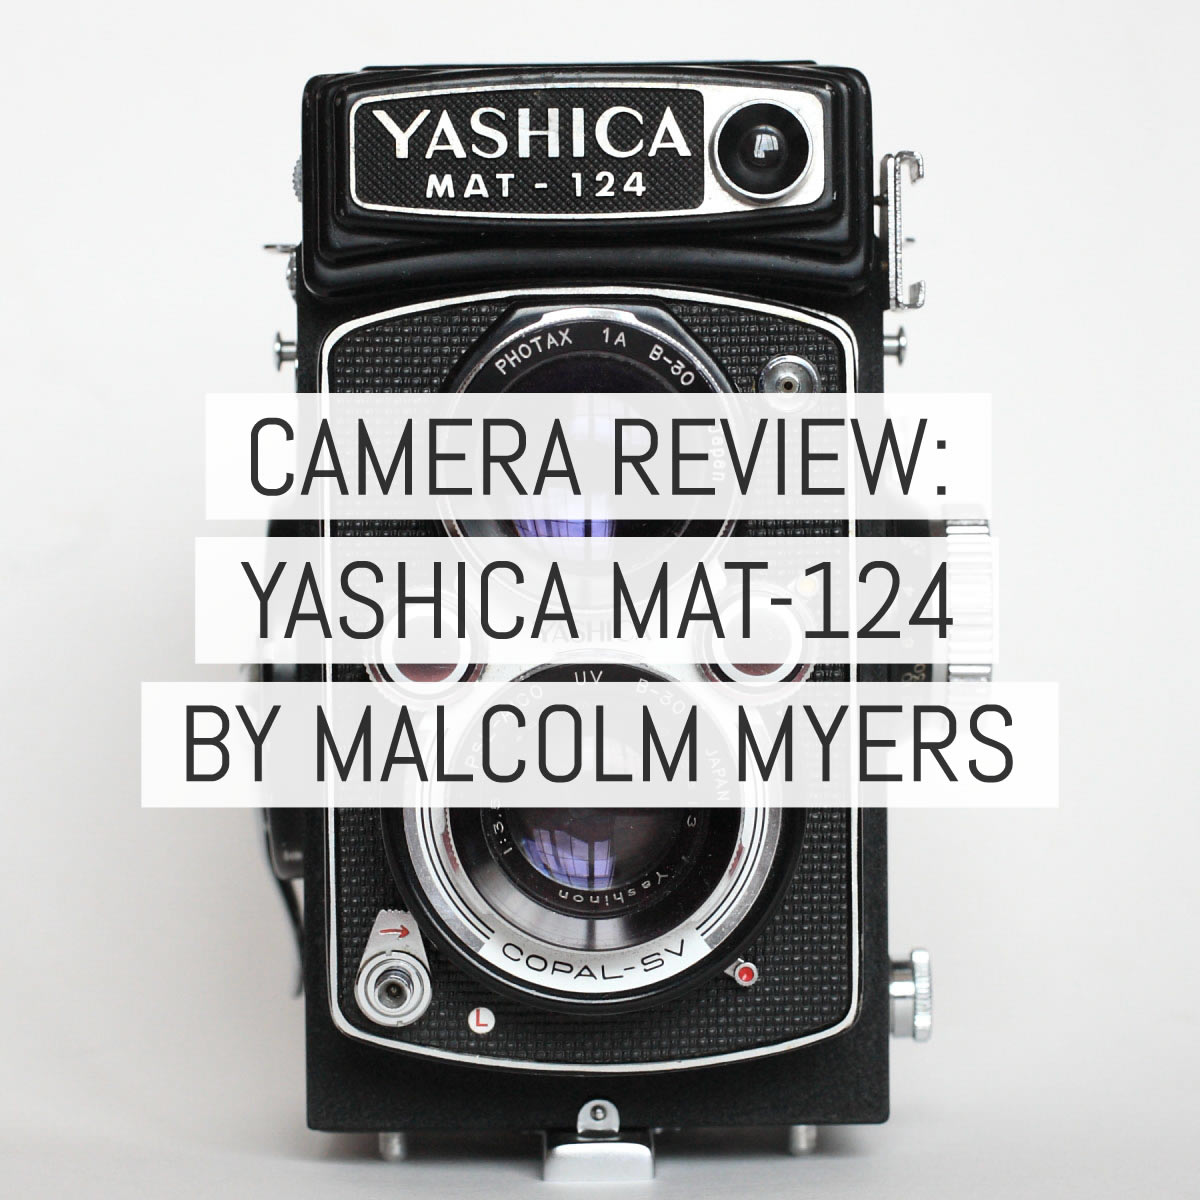 Camera review: the Yashica Mat 124